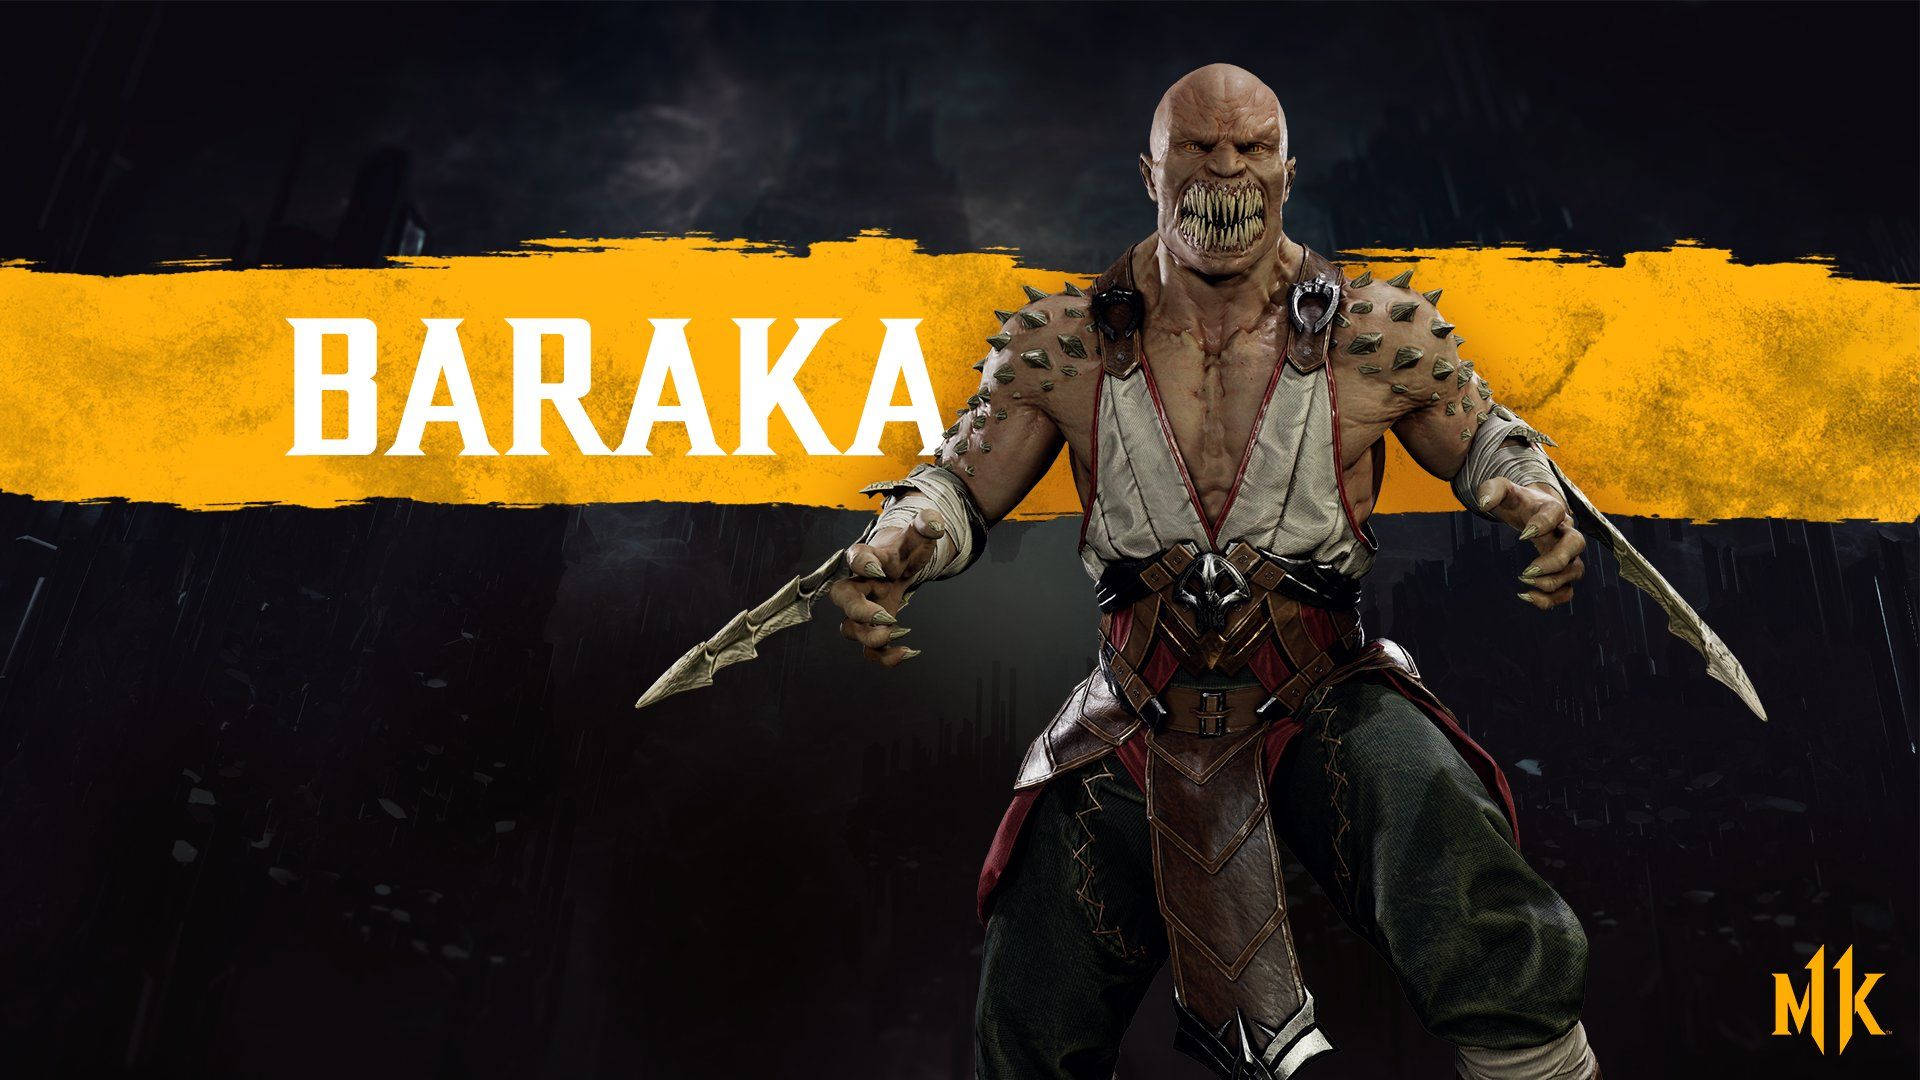 Baraka, from Mortal Kombat 11, is poised to unleash a fearsome attack. Wallpaper